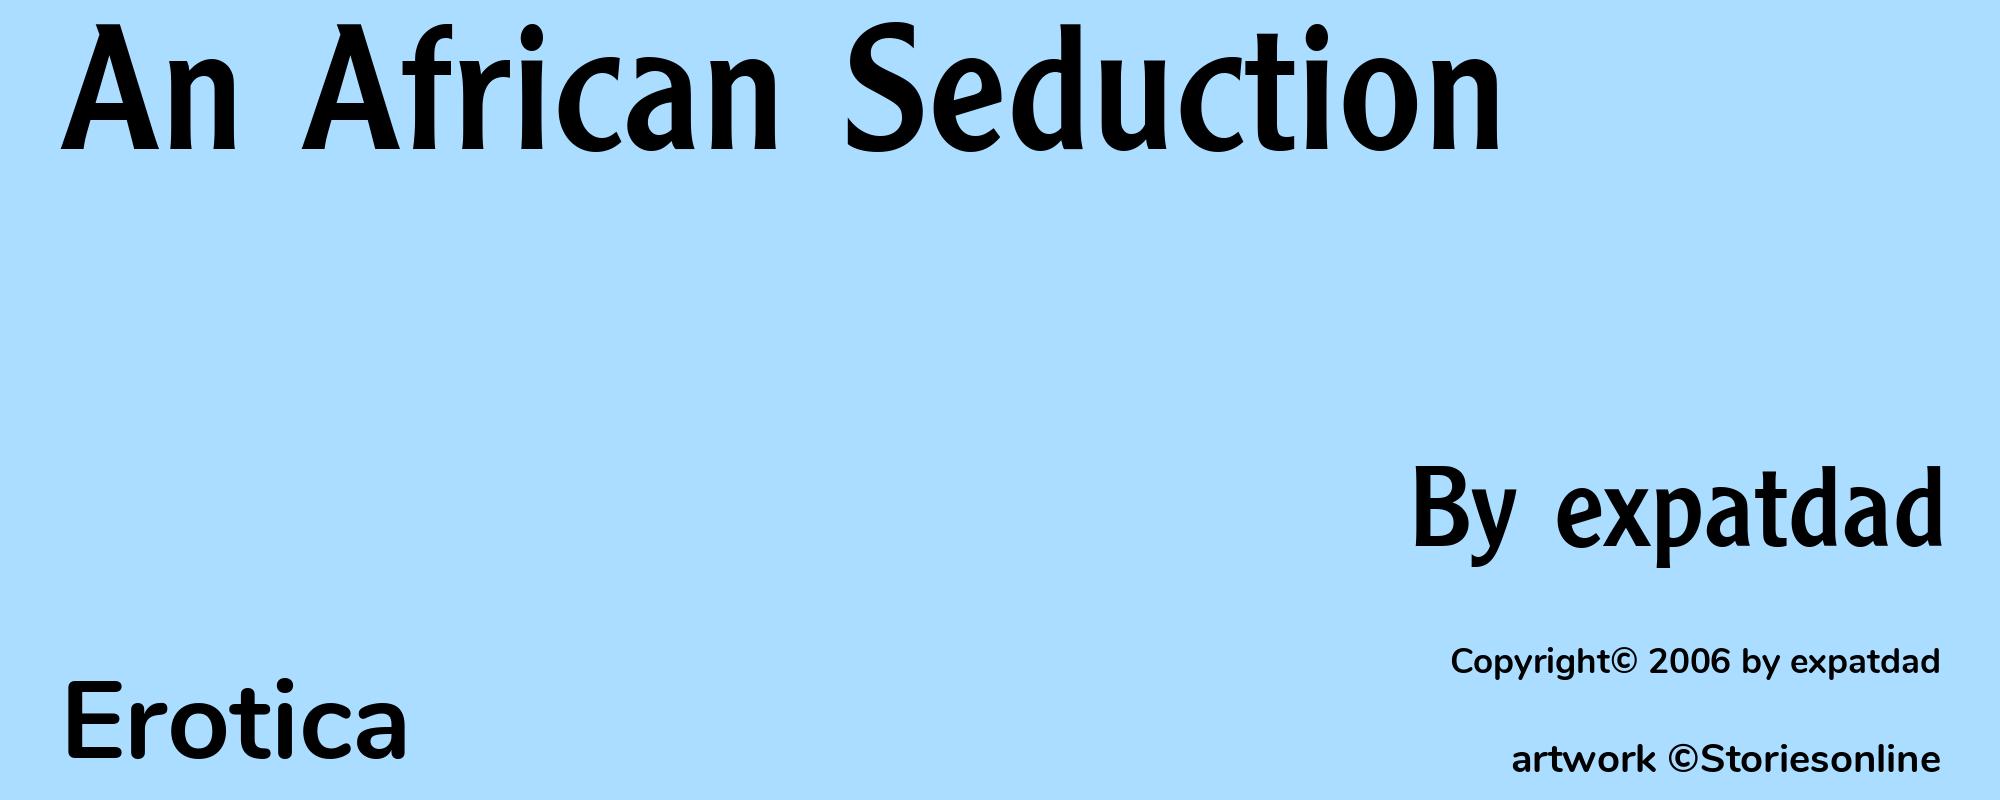 An African Seduction - Cover